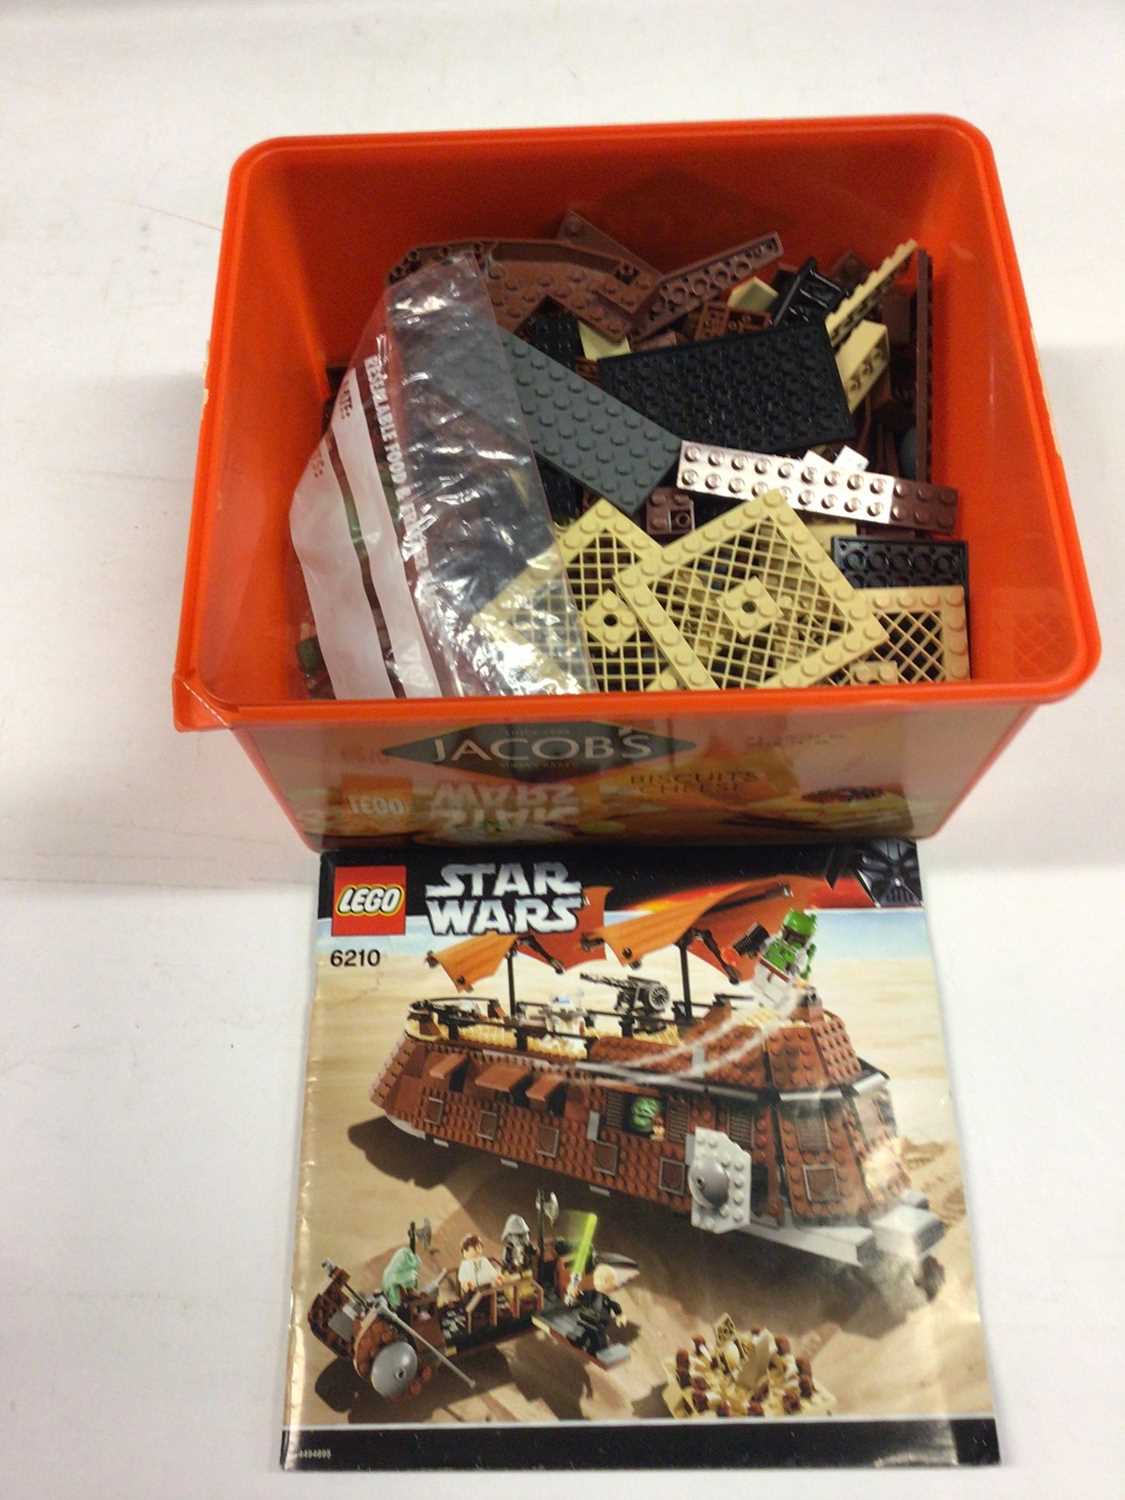 Lot 6 - Lego 75093 Death Star Final Duel, 6210 Jabba Sail Barge, 6210 Jabba Sail Barge, all including instructions and mini figs, Not boxed